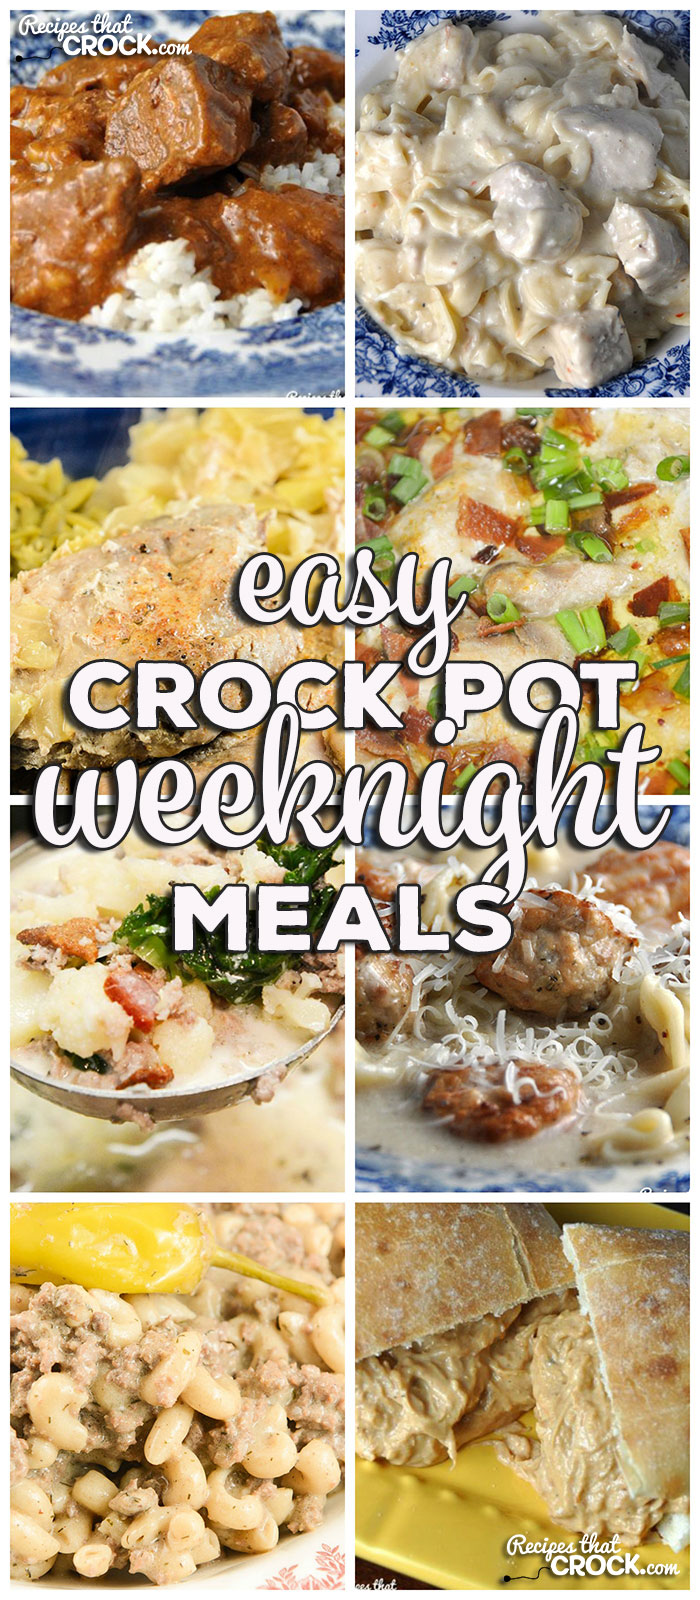 This week for our Friday Favorites we have Easy Crock Pot Weeknight Meals like Crock Pot Meatball Tortellini Soup, Slow Cooker Texas Chili, Crock Pot Creamy Mississippi Beefy Mac, Crock Pot Pork Chops – Melt In Your Mouth, Crock Pot Beefy Tostada Pie, Slow Cooker Chicken Stroganoff, Crock Pot Pork Chops and Cabbage, Low Carb Crock Pot Creamy Bacon Onion Chicken, Creamy Crock Pot BBQ Chicken Sandwiches, Crock Pot Cheesy Chicken Spaghetti, Crock Pot Goulash, Crock Pot Chicken Alfredo Ravioli Casserole, Low Carb Crock Pot Zuppa Toscana Soup and Crock Pot Pull Apart Pizza Bread.